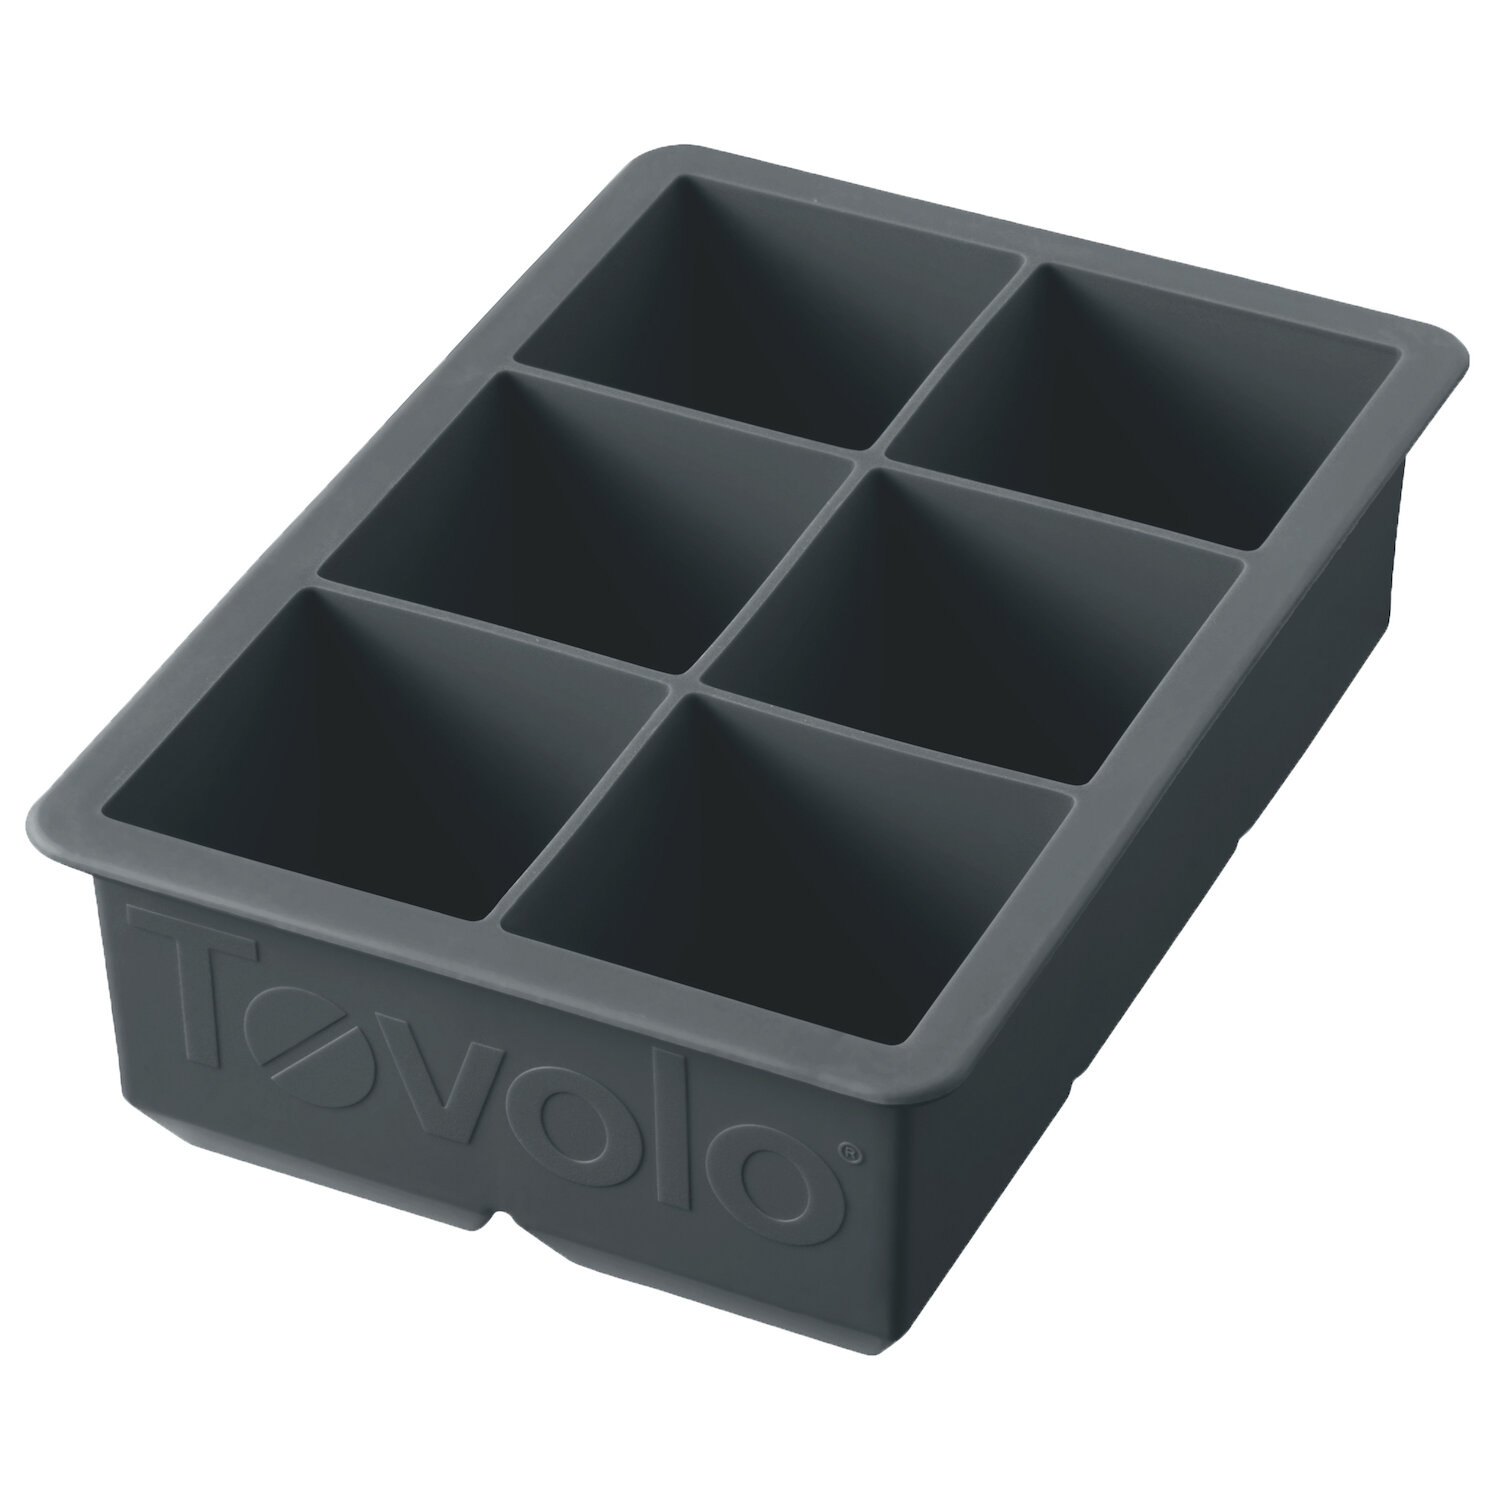 King Cube Ice Cube Tray - Cutler's